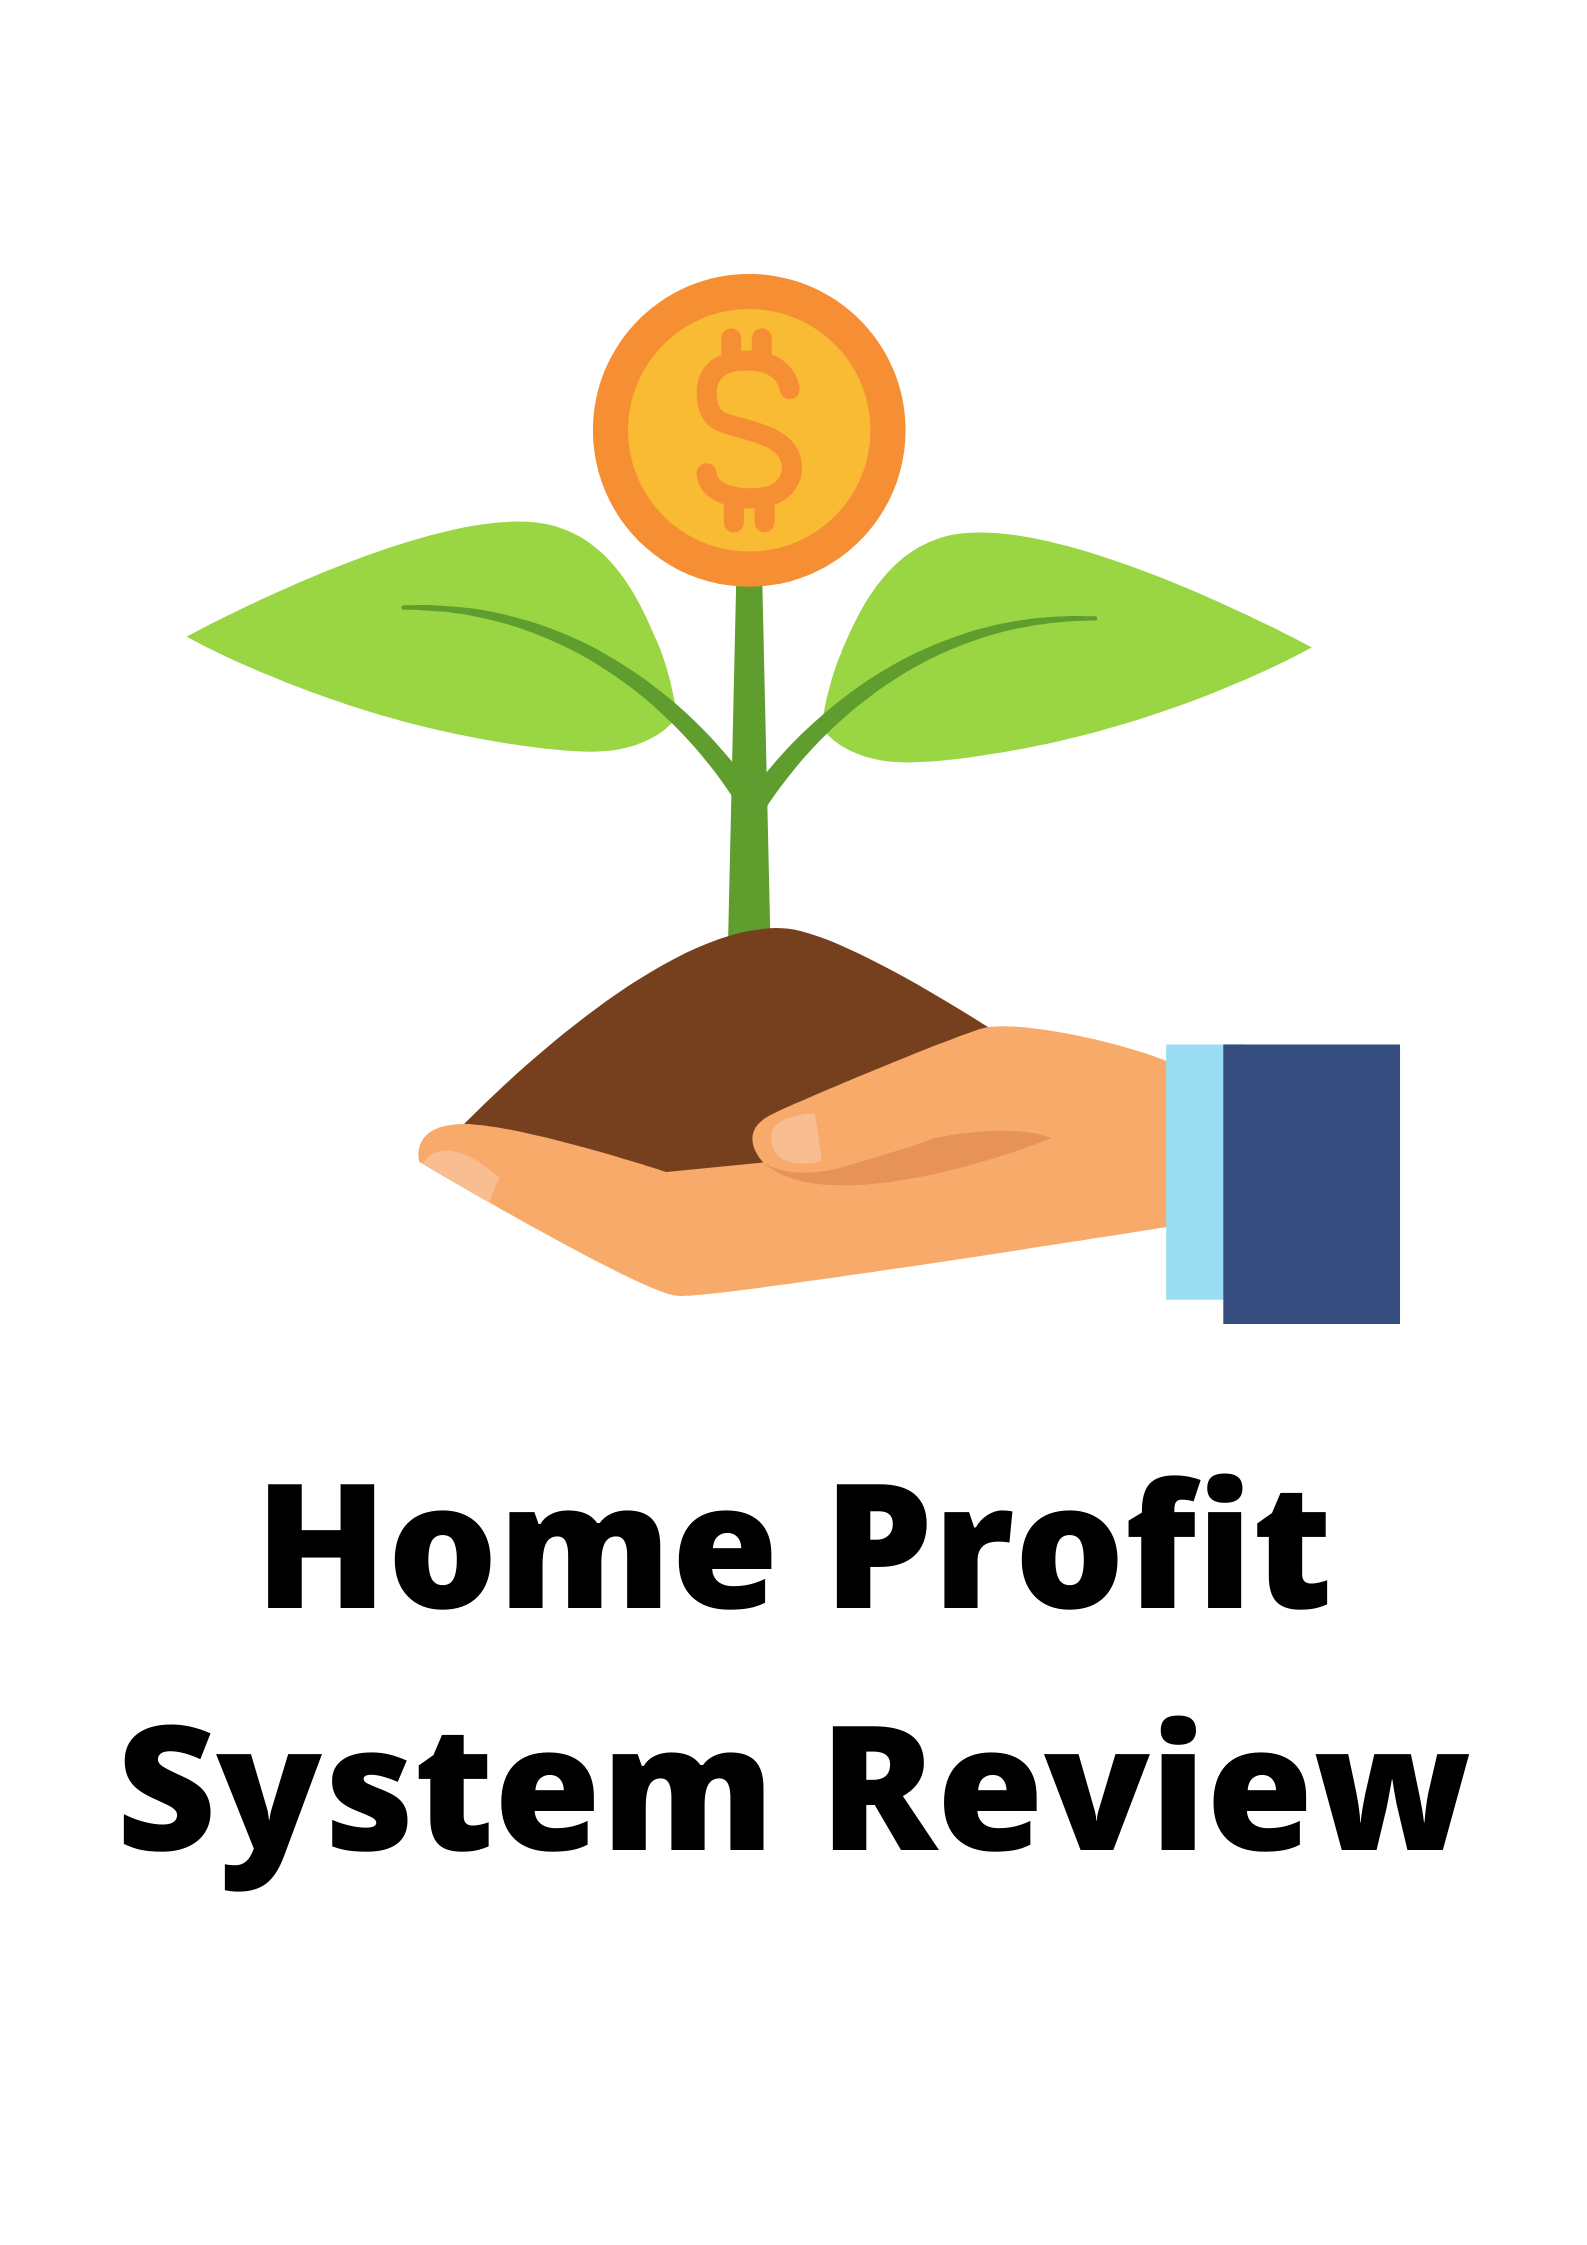 Home Profit System Review